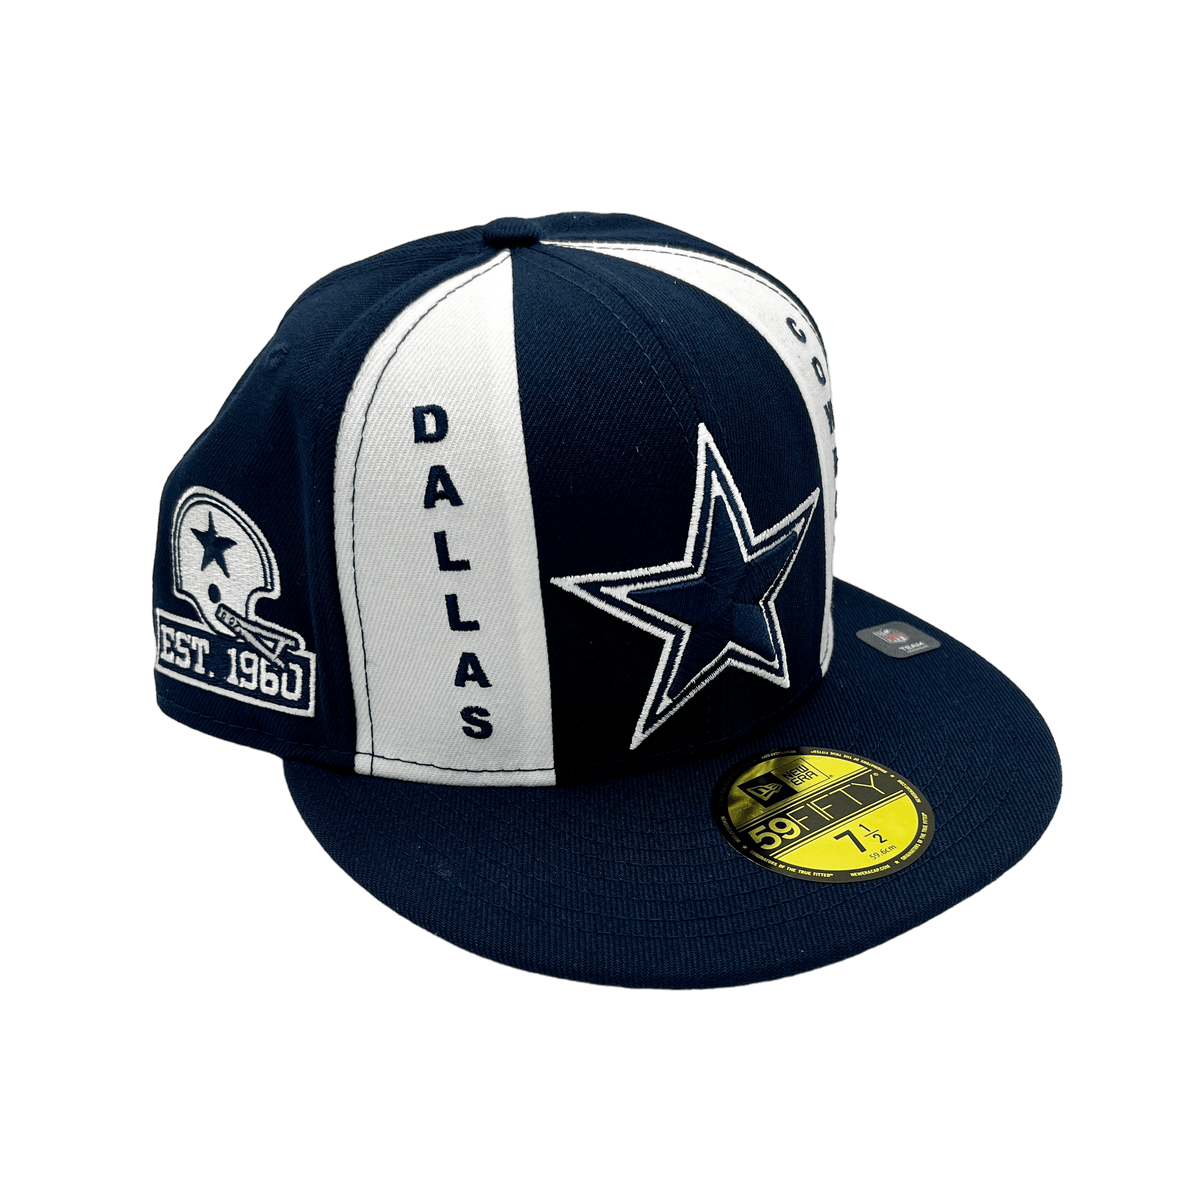 cowboys fitted hat with patches